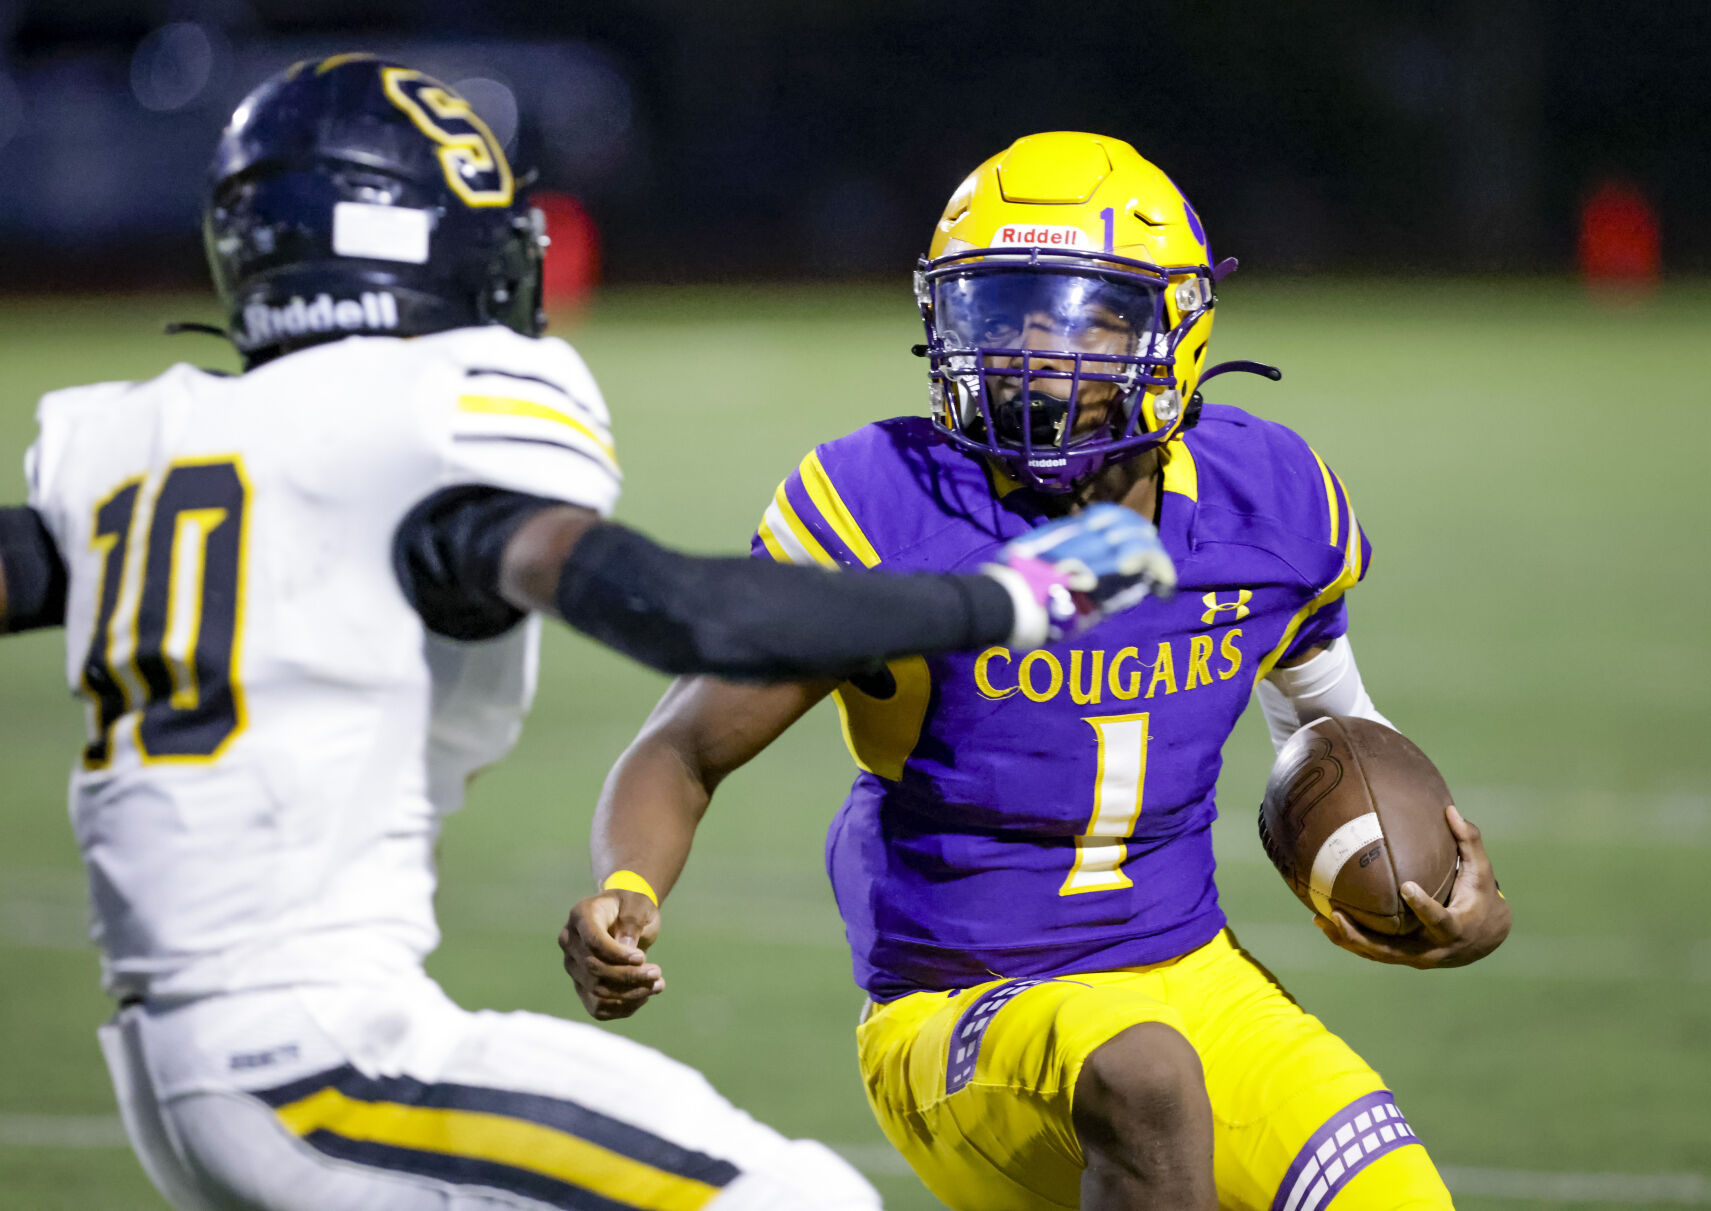 Who has the most yards? Check out the New Orleans area prep football stat leaders headed into Week 9